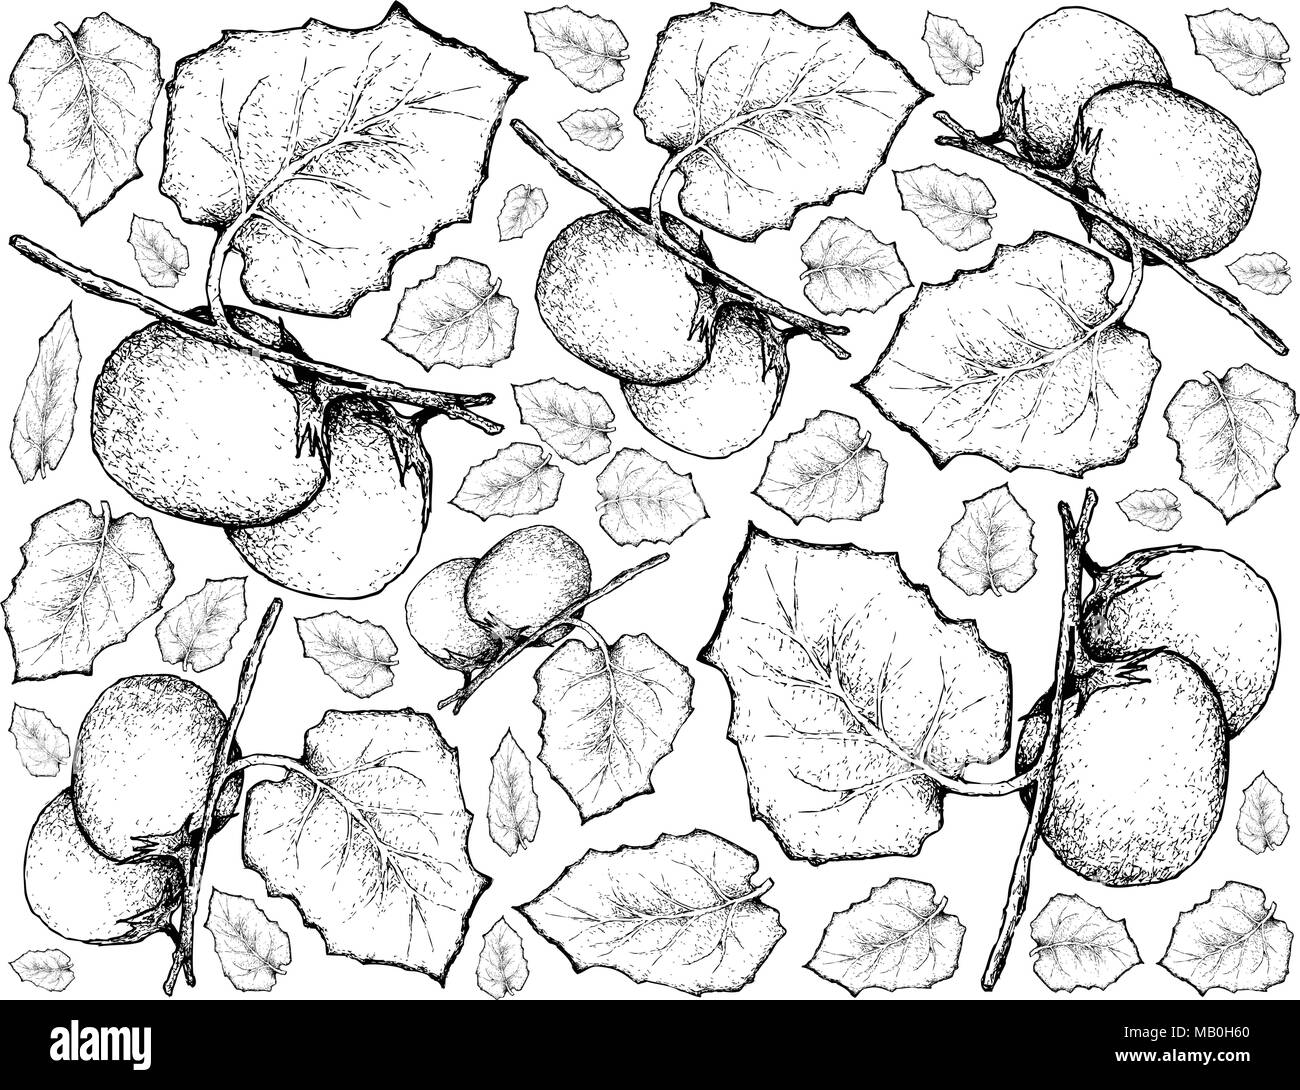 Exotic Fruit, Illustration Wallpaper Background of Hand Drawn Sketch of Cubiu Cocona or Solanum Sessiliflorum Fruits. High in Iron, Niacin or Vitamin  Stock Vector